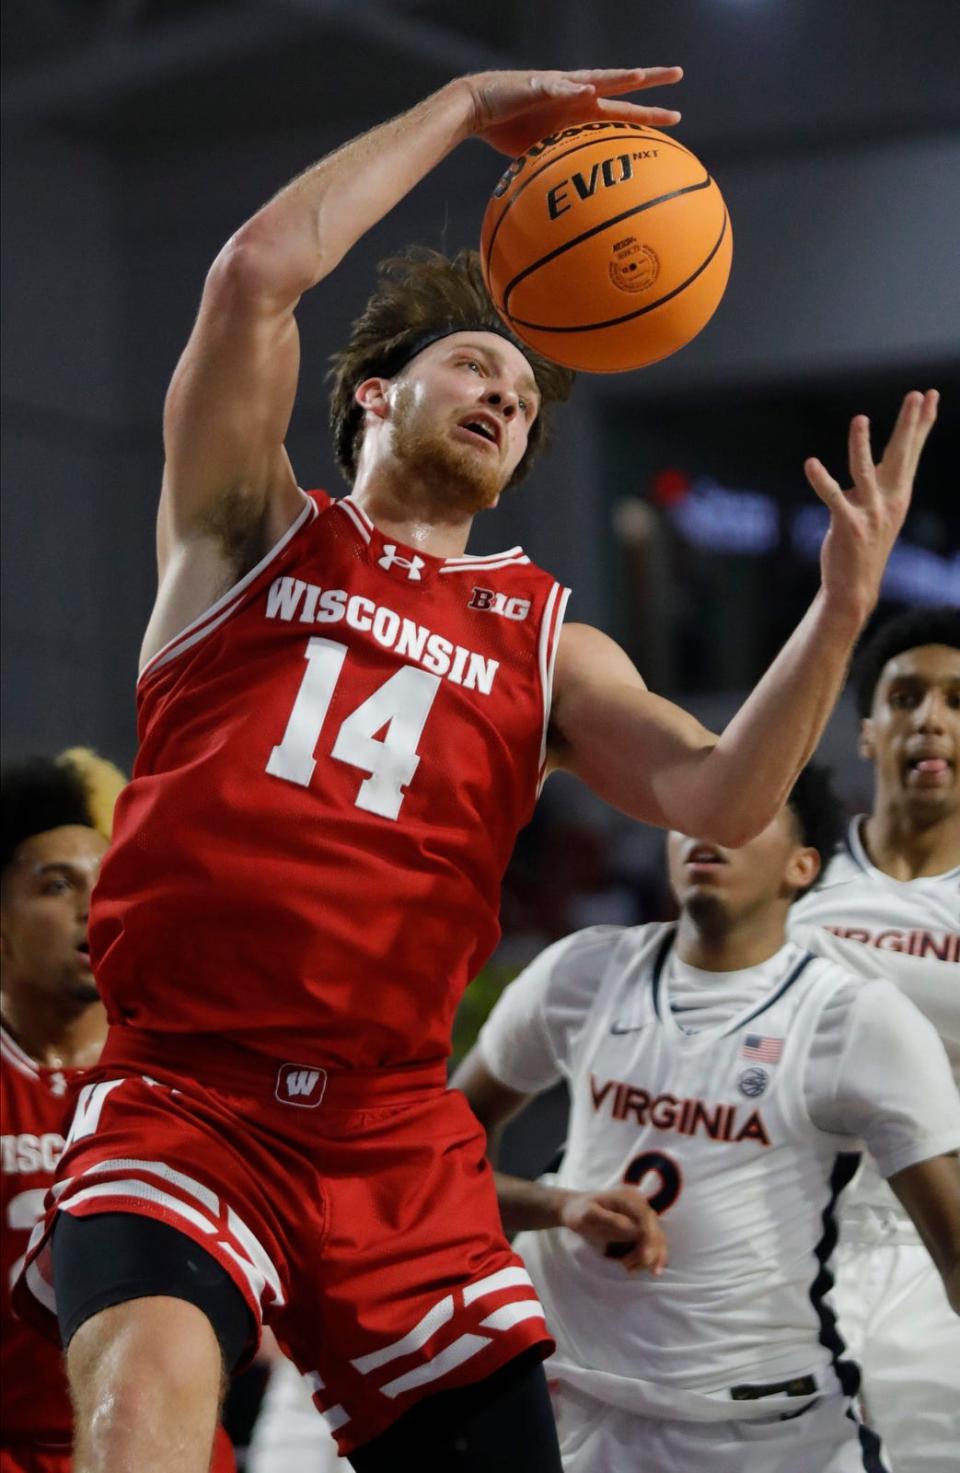 Wisconsin forward Carter Gilmore grabs a rebound. The University of Wisconsin Badgers mens basketball team defeated the University of Virginia Cavaliers as they faced off in the 2023 Fort Myers Tip-Off tournament Monday, November 20, 2023. The Badgers won with a final score of 65-41.